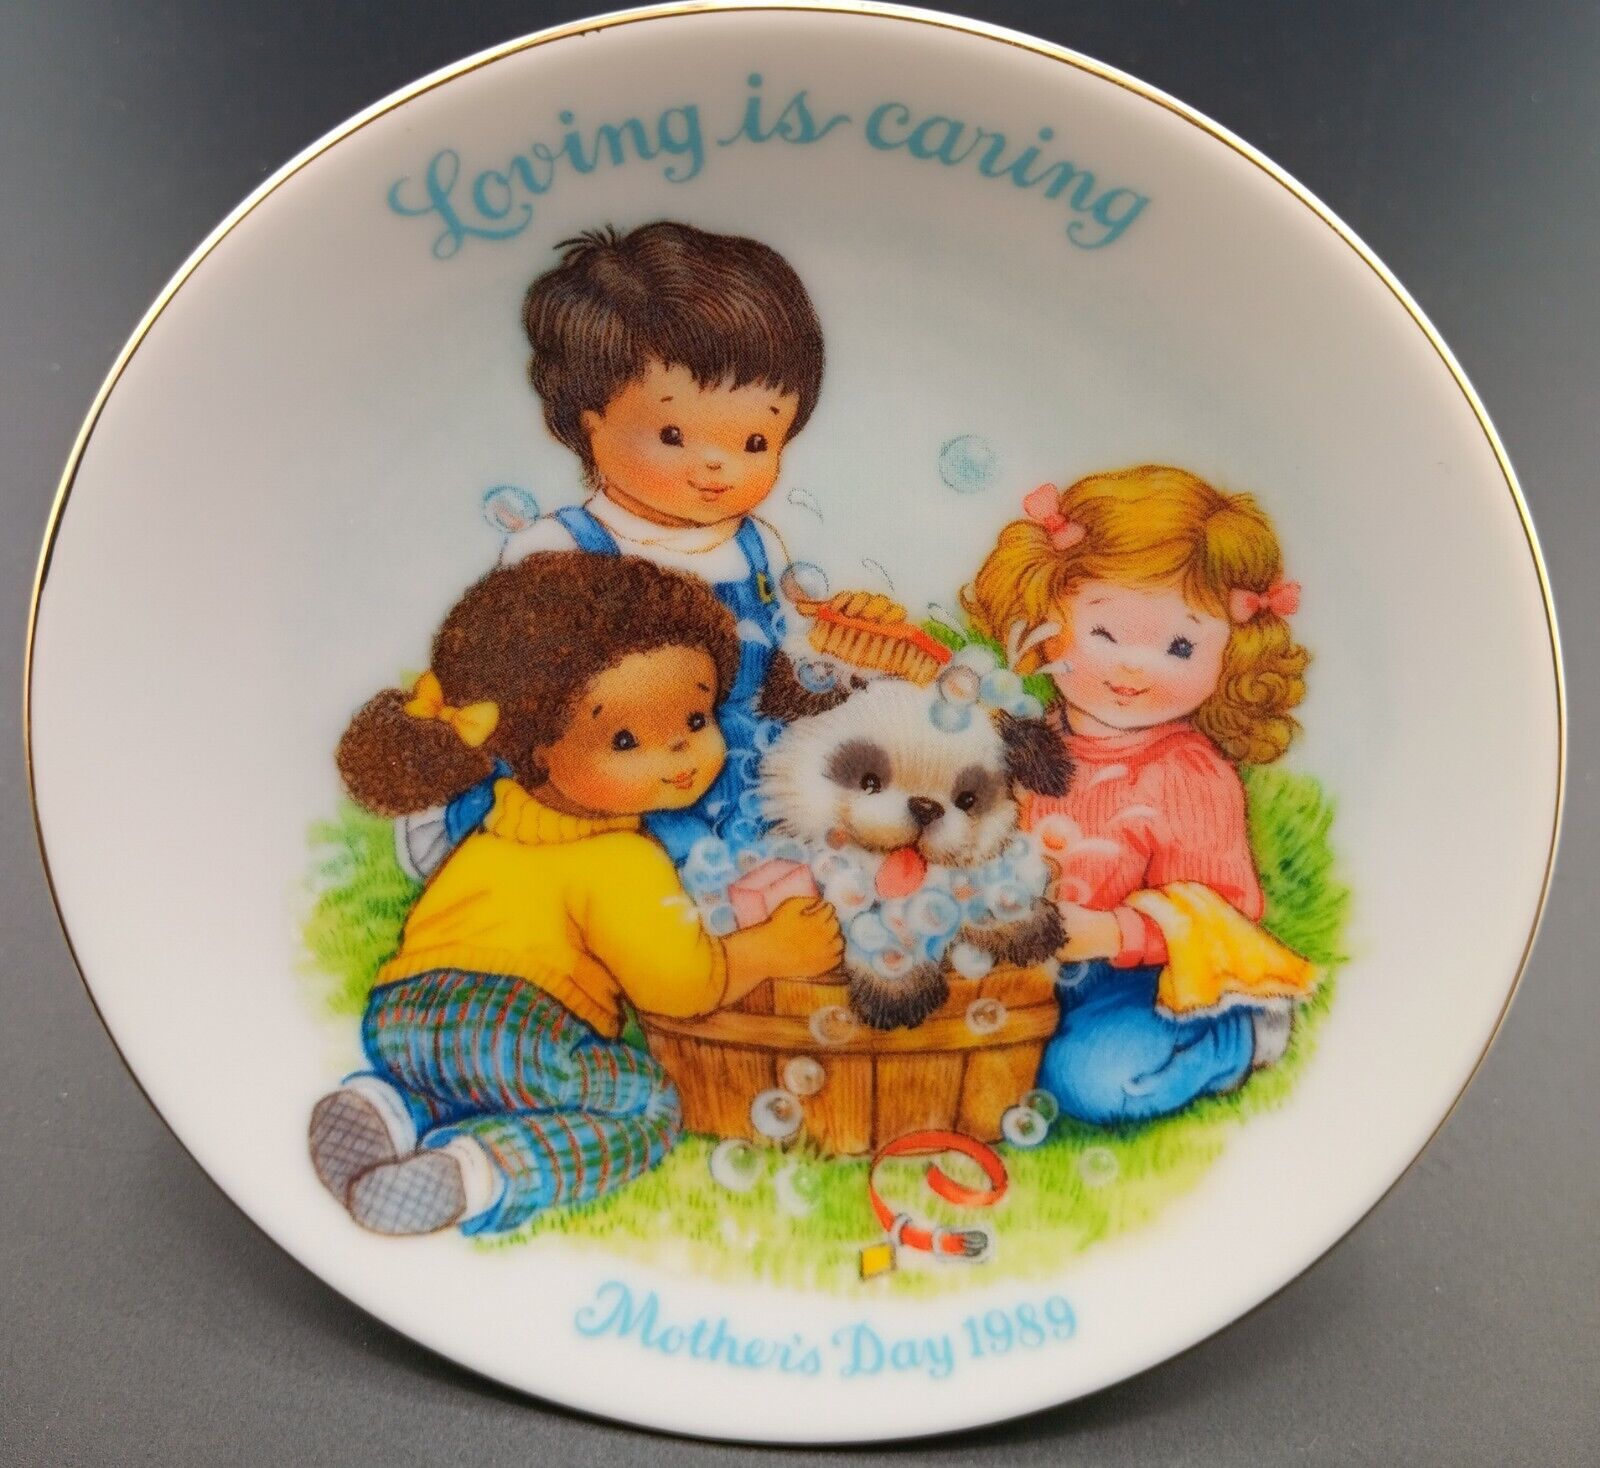 Vintage Avon Mothers Day Plate 1988. Born in \'88?? AWESOME GIFT FOR YOUR MOTHER